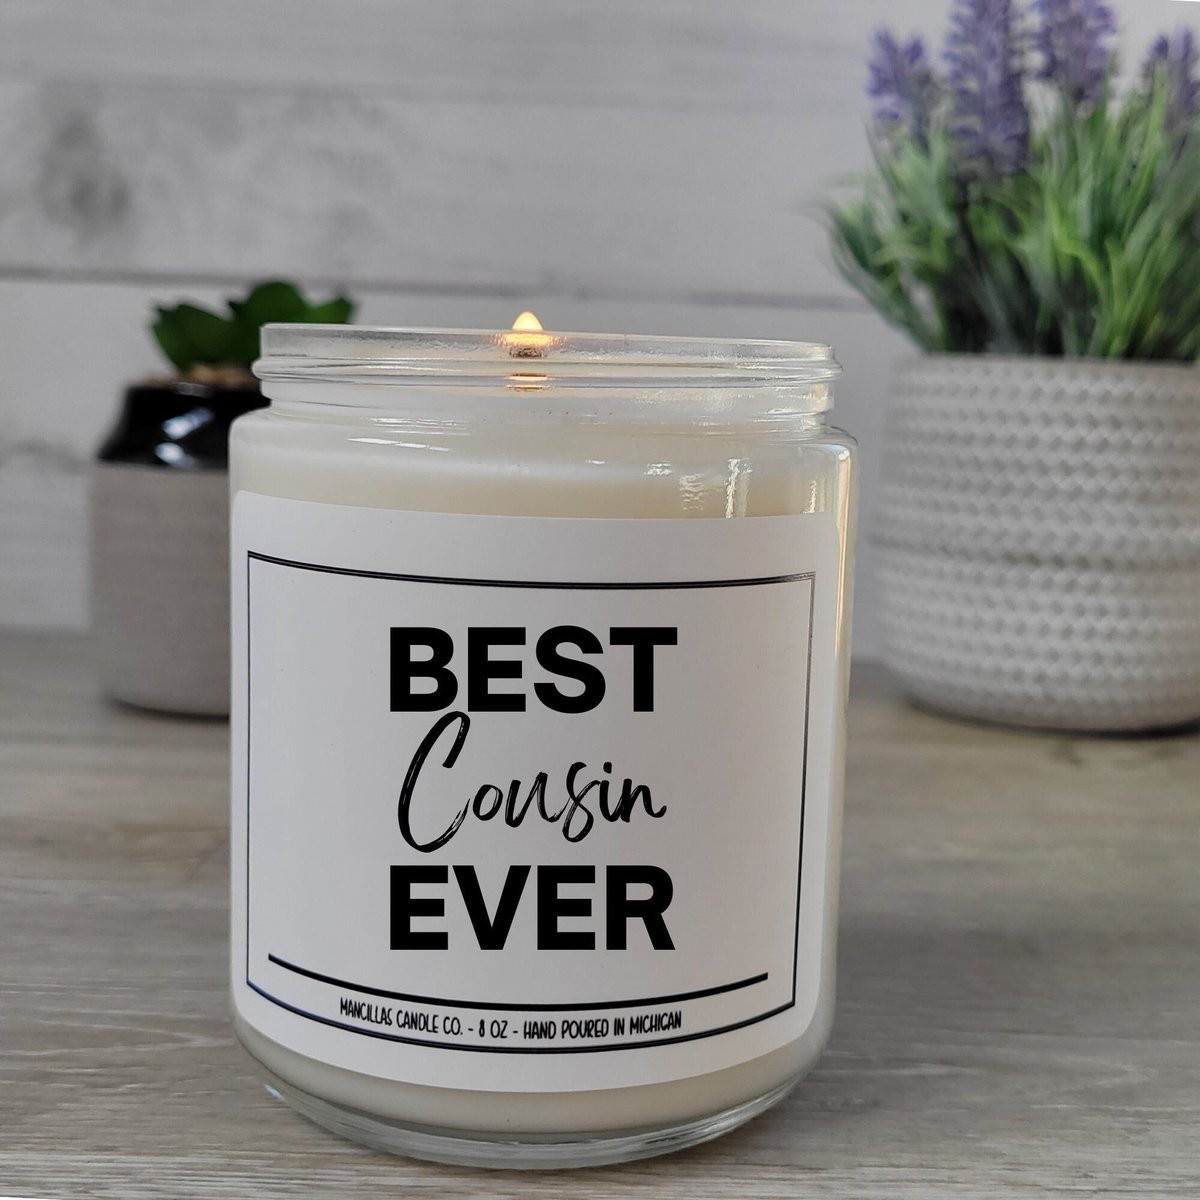 Excited to share the latest addition to my #etsy shop: Best Cousin Ever Candle, Birthday Gift for Cousin, Gift for her, Candle for him etsy.me/3MC1ldP #white #black #soy #entryway #cotton #organicingredients #bestcousinever #candle #birthdaygift